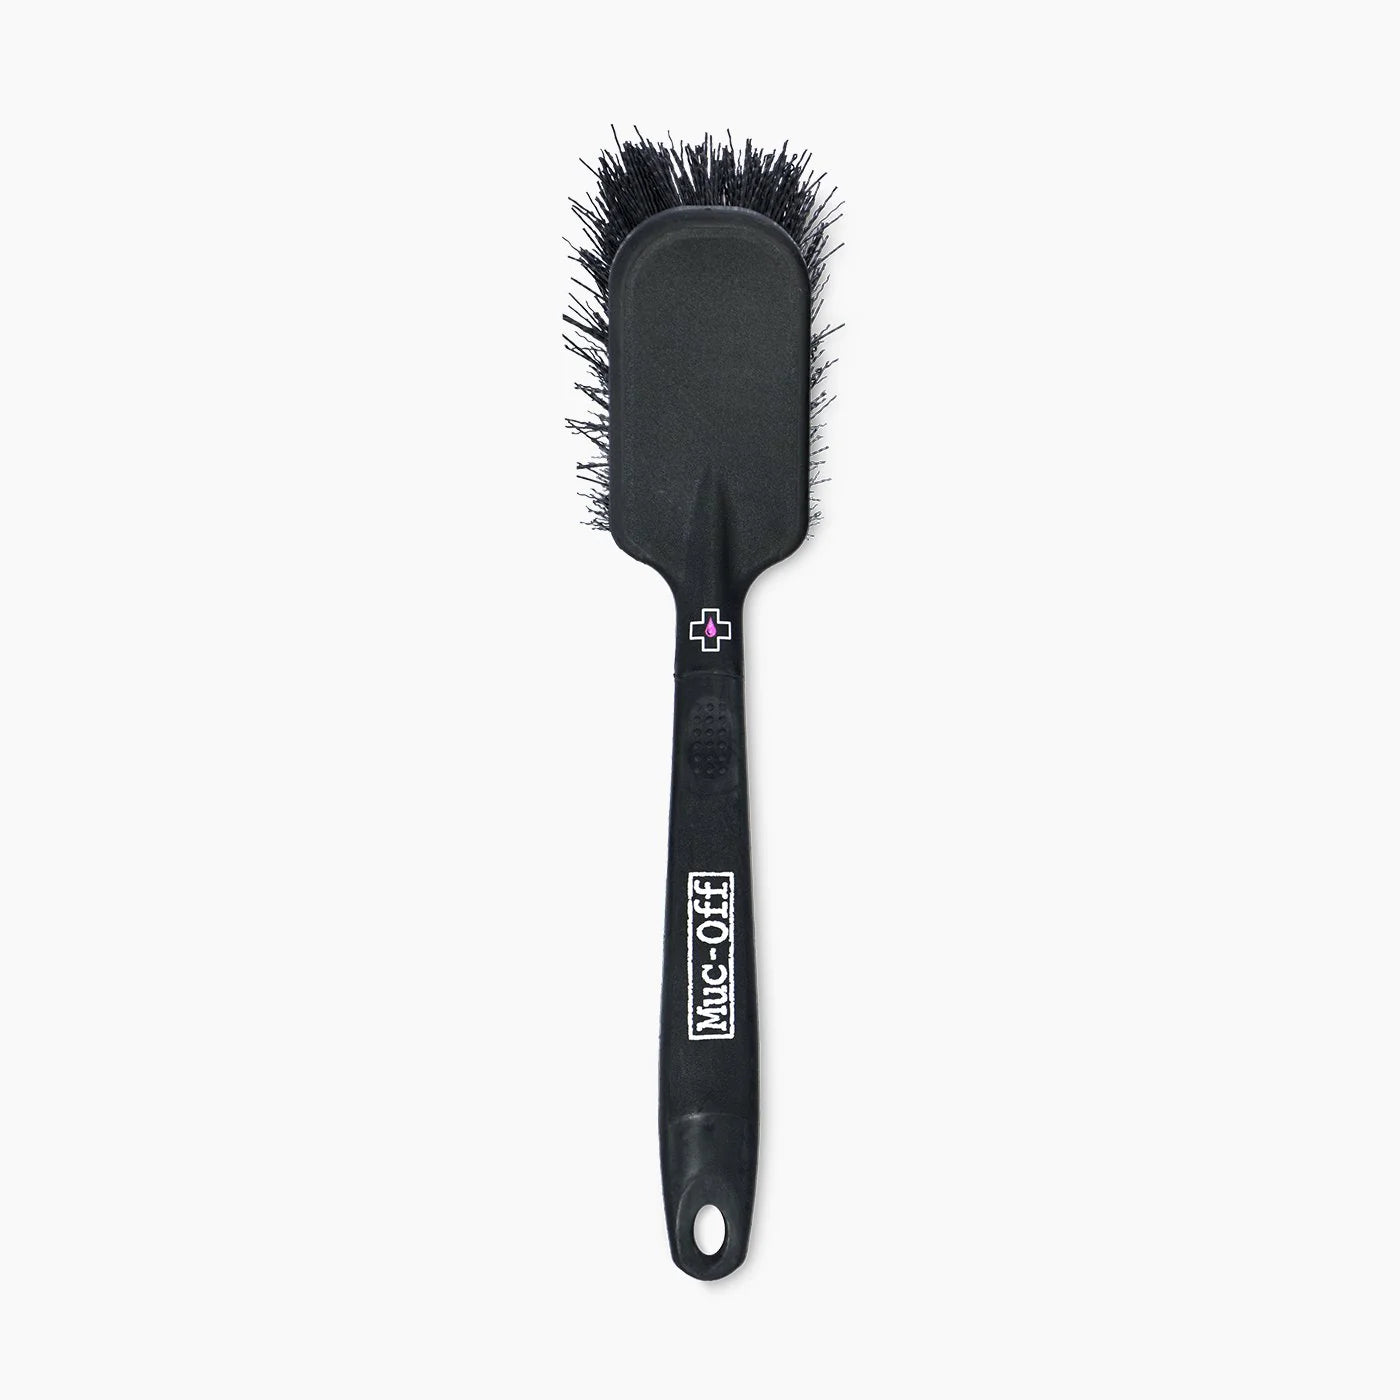 Muc-off Motorcycle Tire and Cassette Brush for Effective Cleaning